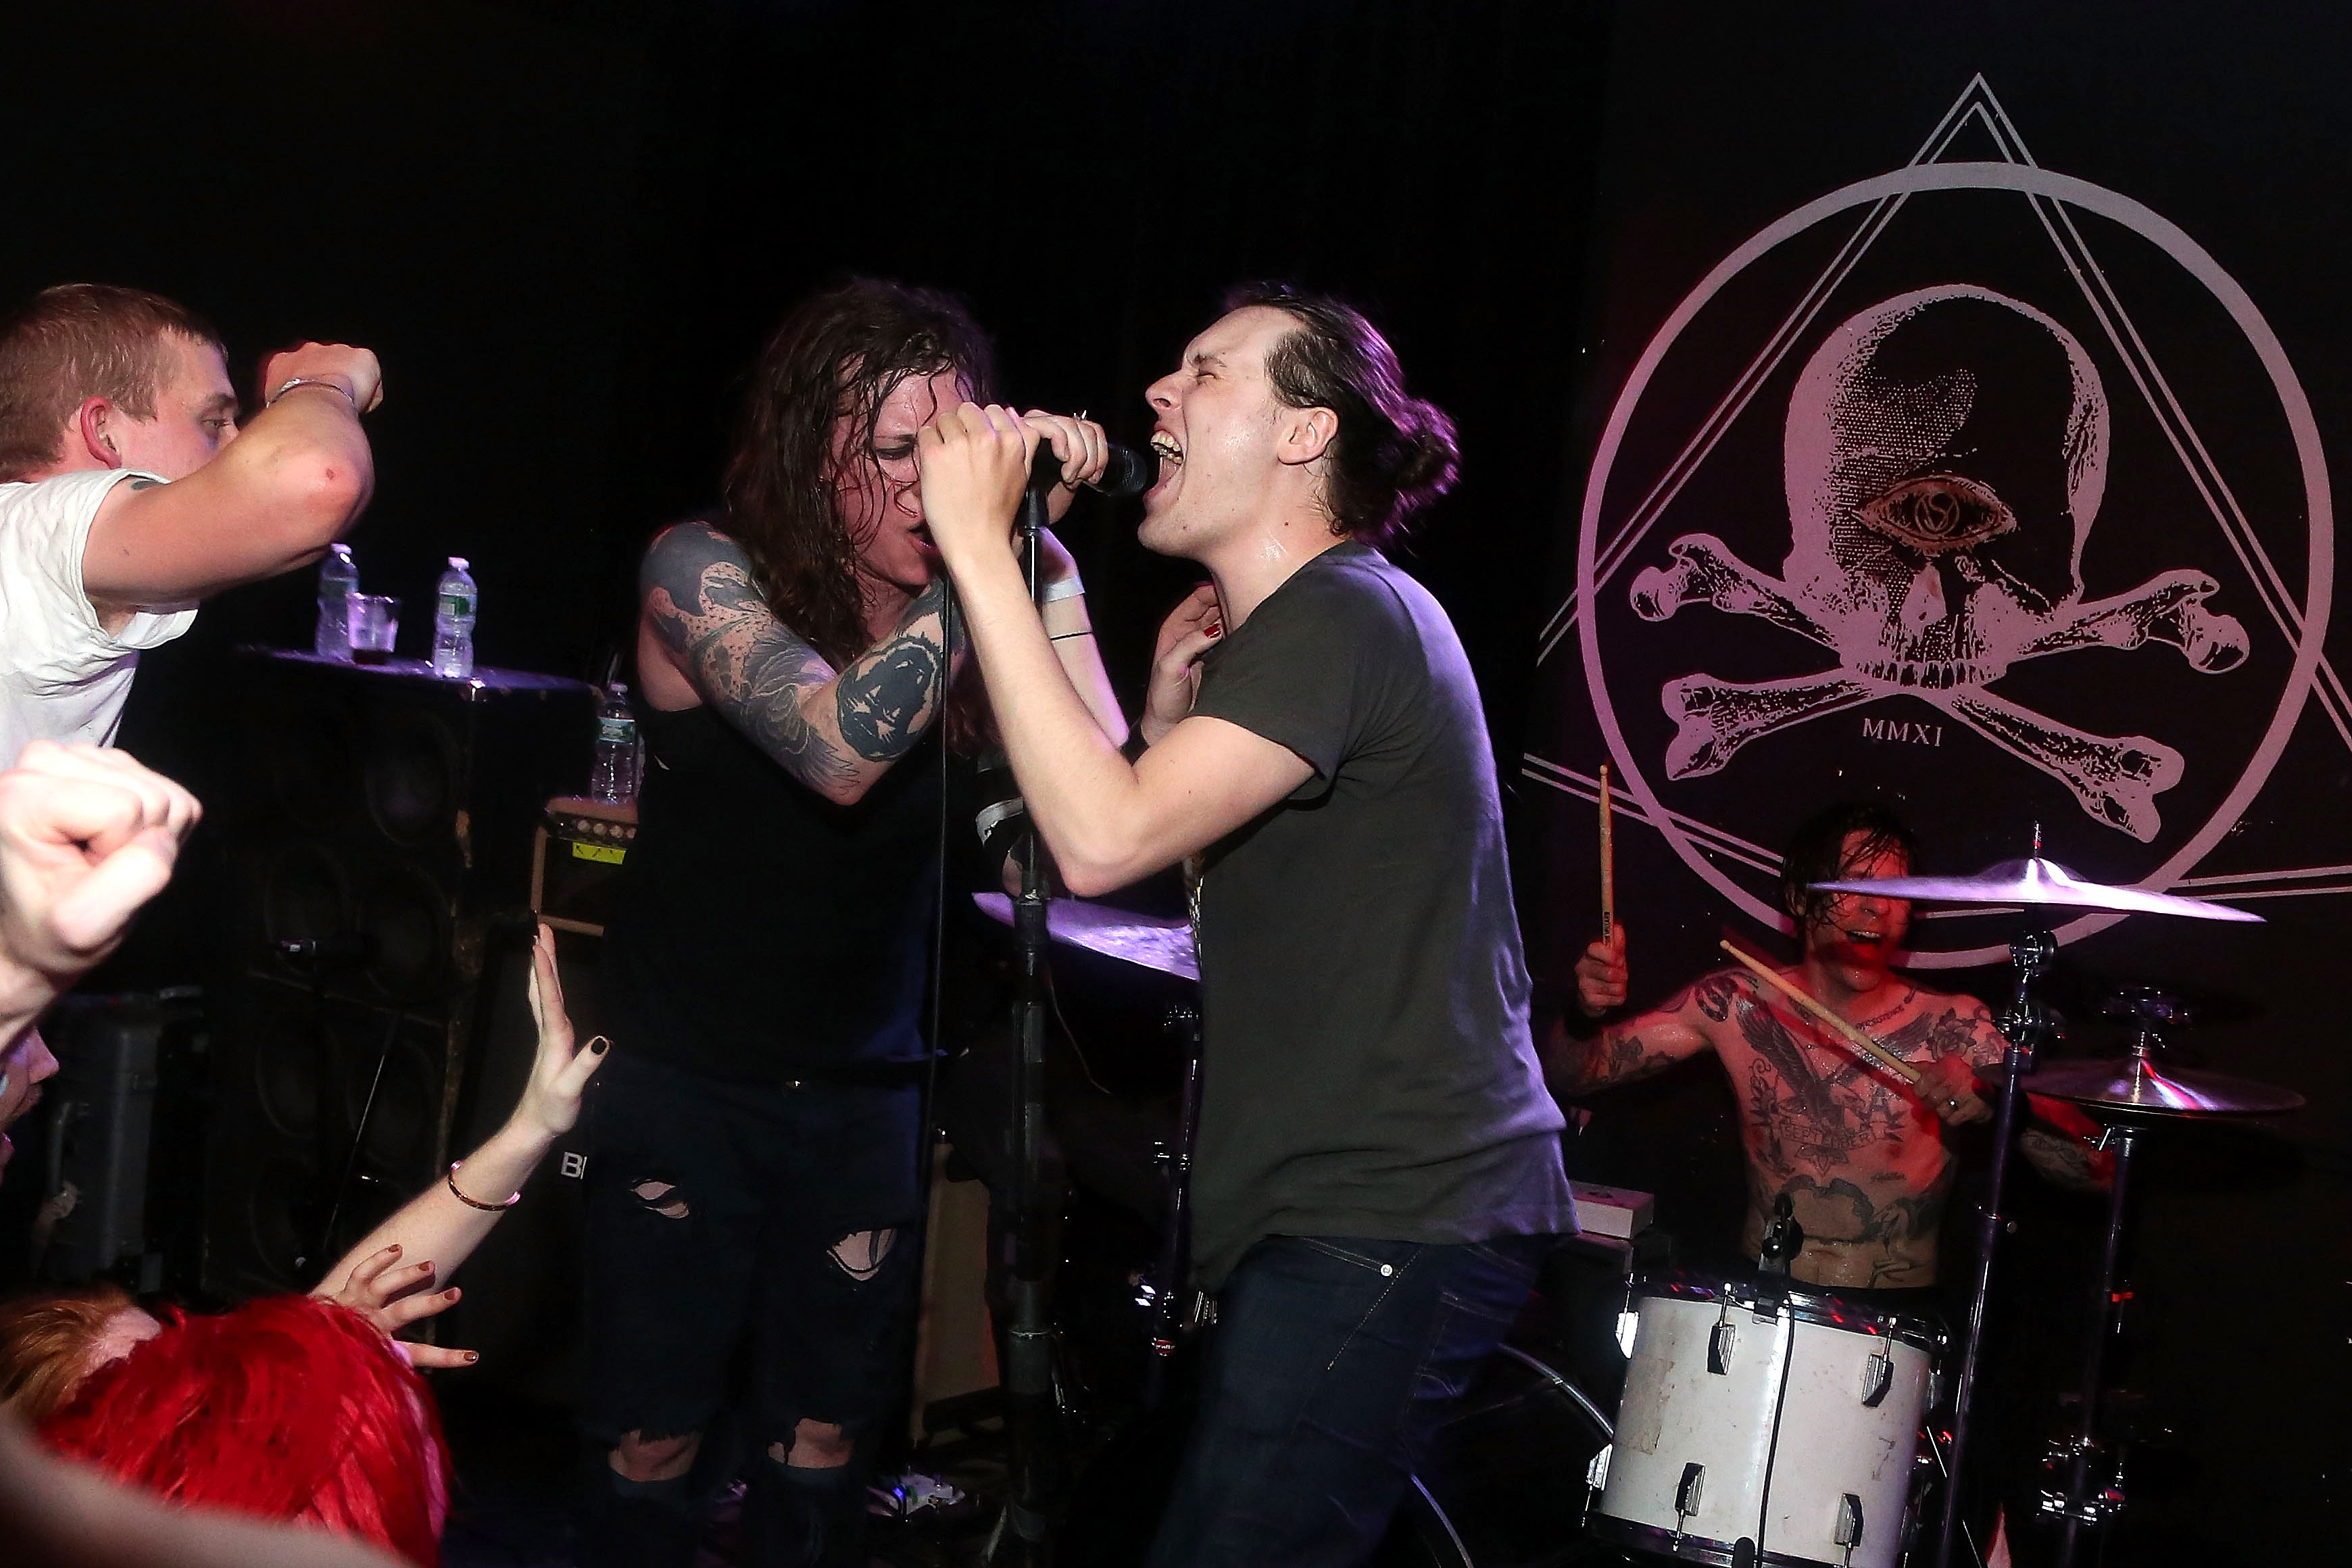 Laura Jane Grace sings with a fan onstage as Against Me! performs during a secret aftershow party at Brooklyn's Saint Vitus Bar on May 4, 2014.